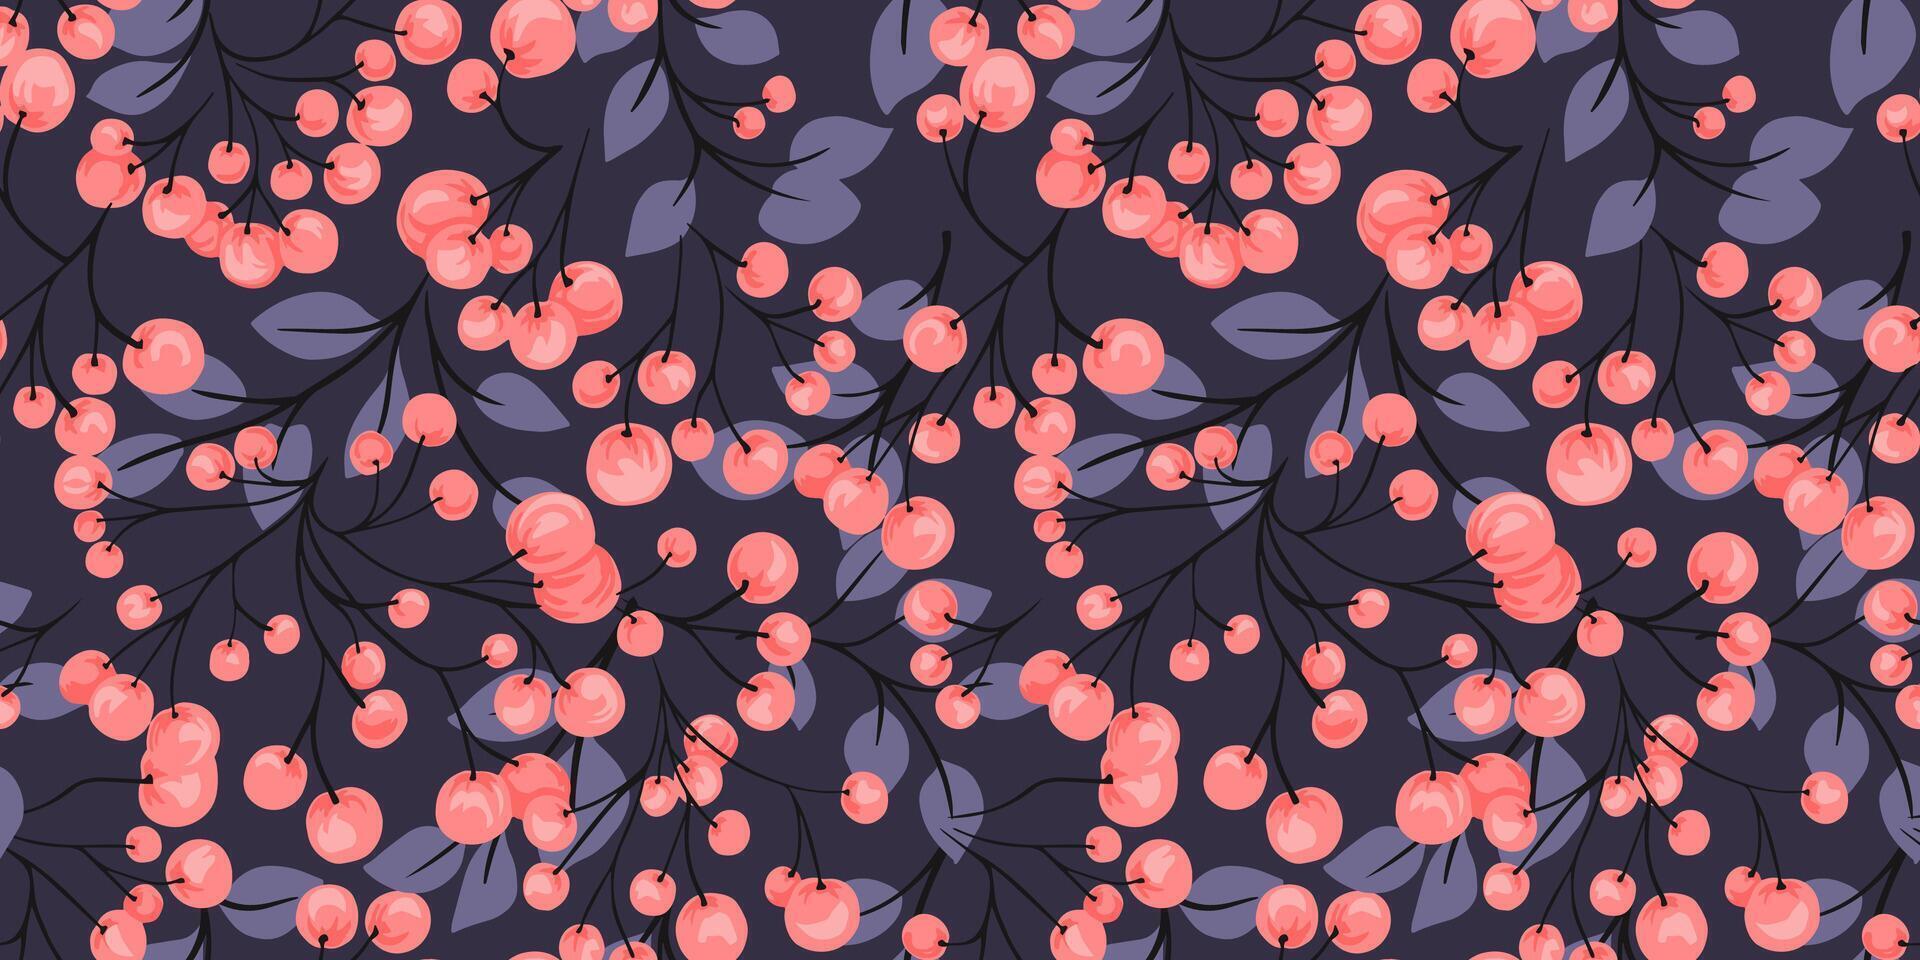 Artistic abstract branches with shapes orange berries intertwined in a seamless pattern on a black background. Vector hand drawn illustration. Colorful botanical autumn print. Collage for designs